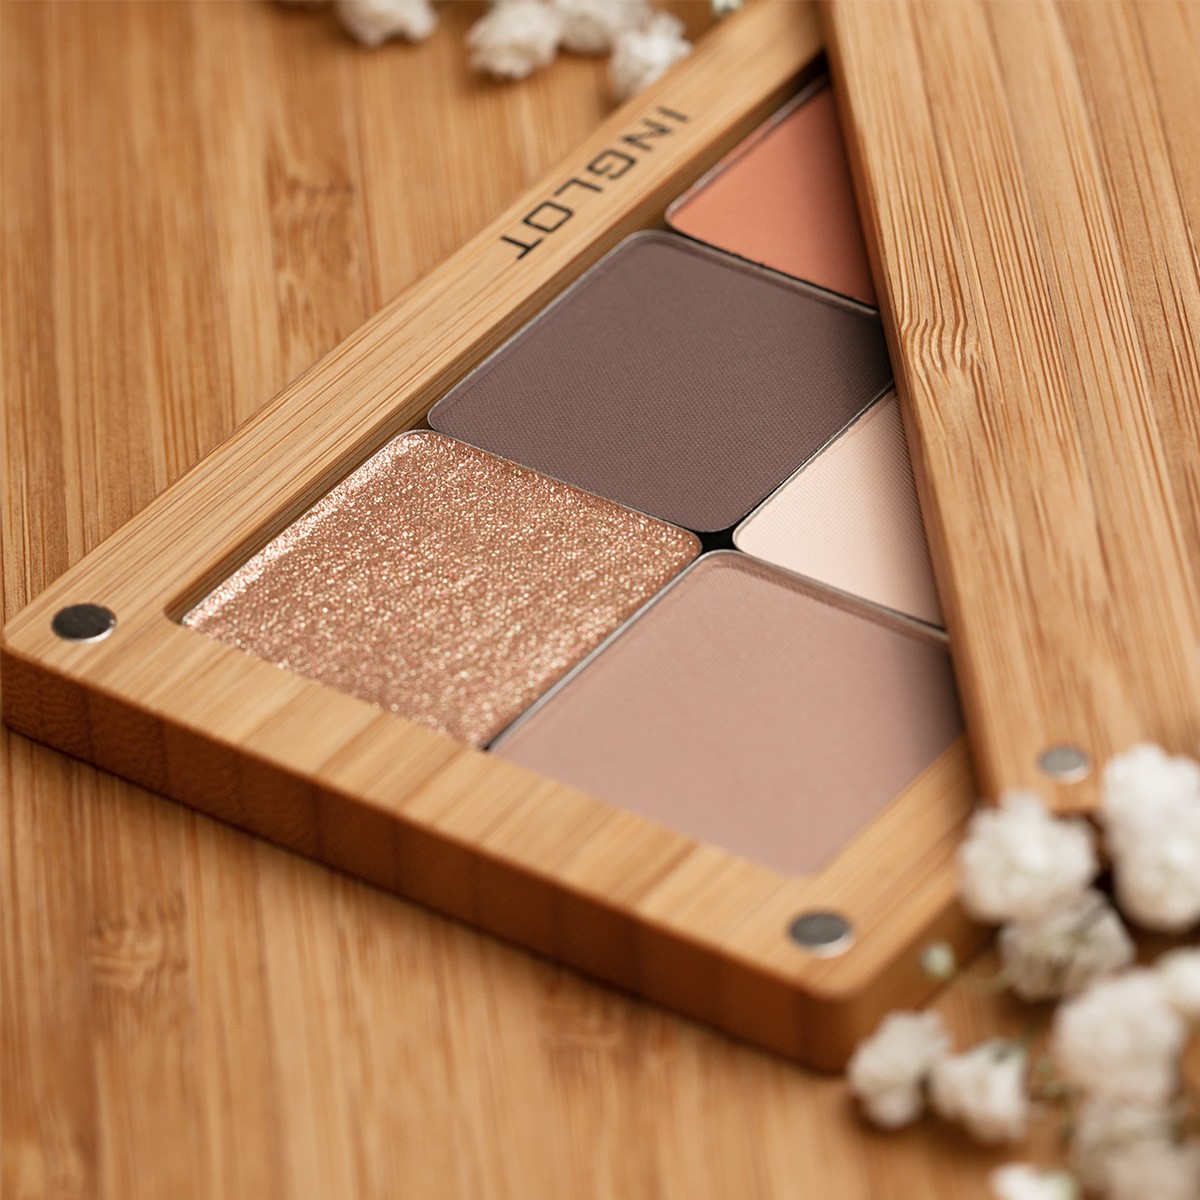 Creating Your Signature Look: Building the Perfect Makeup Palette